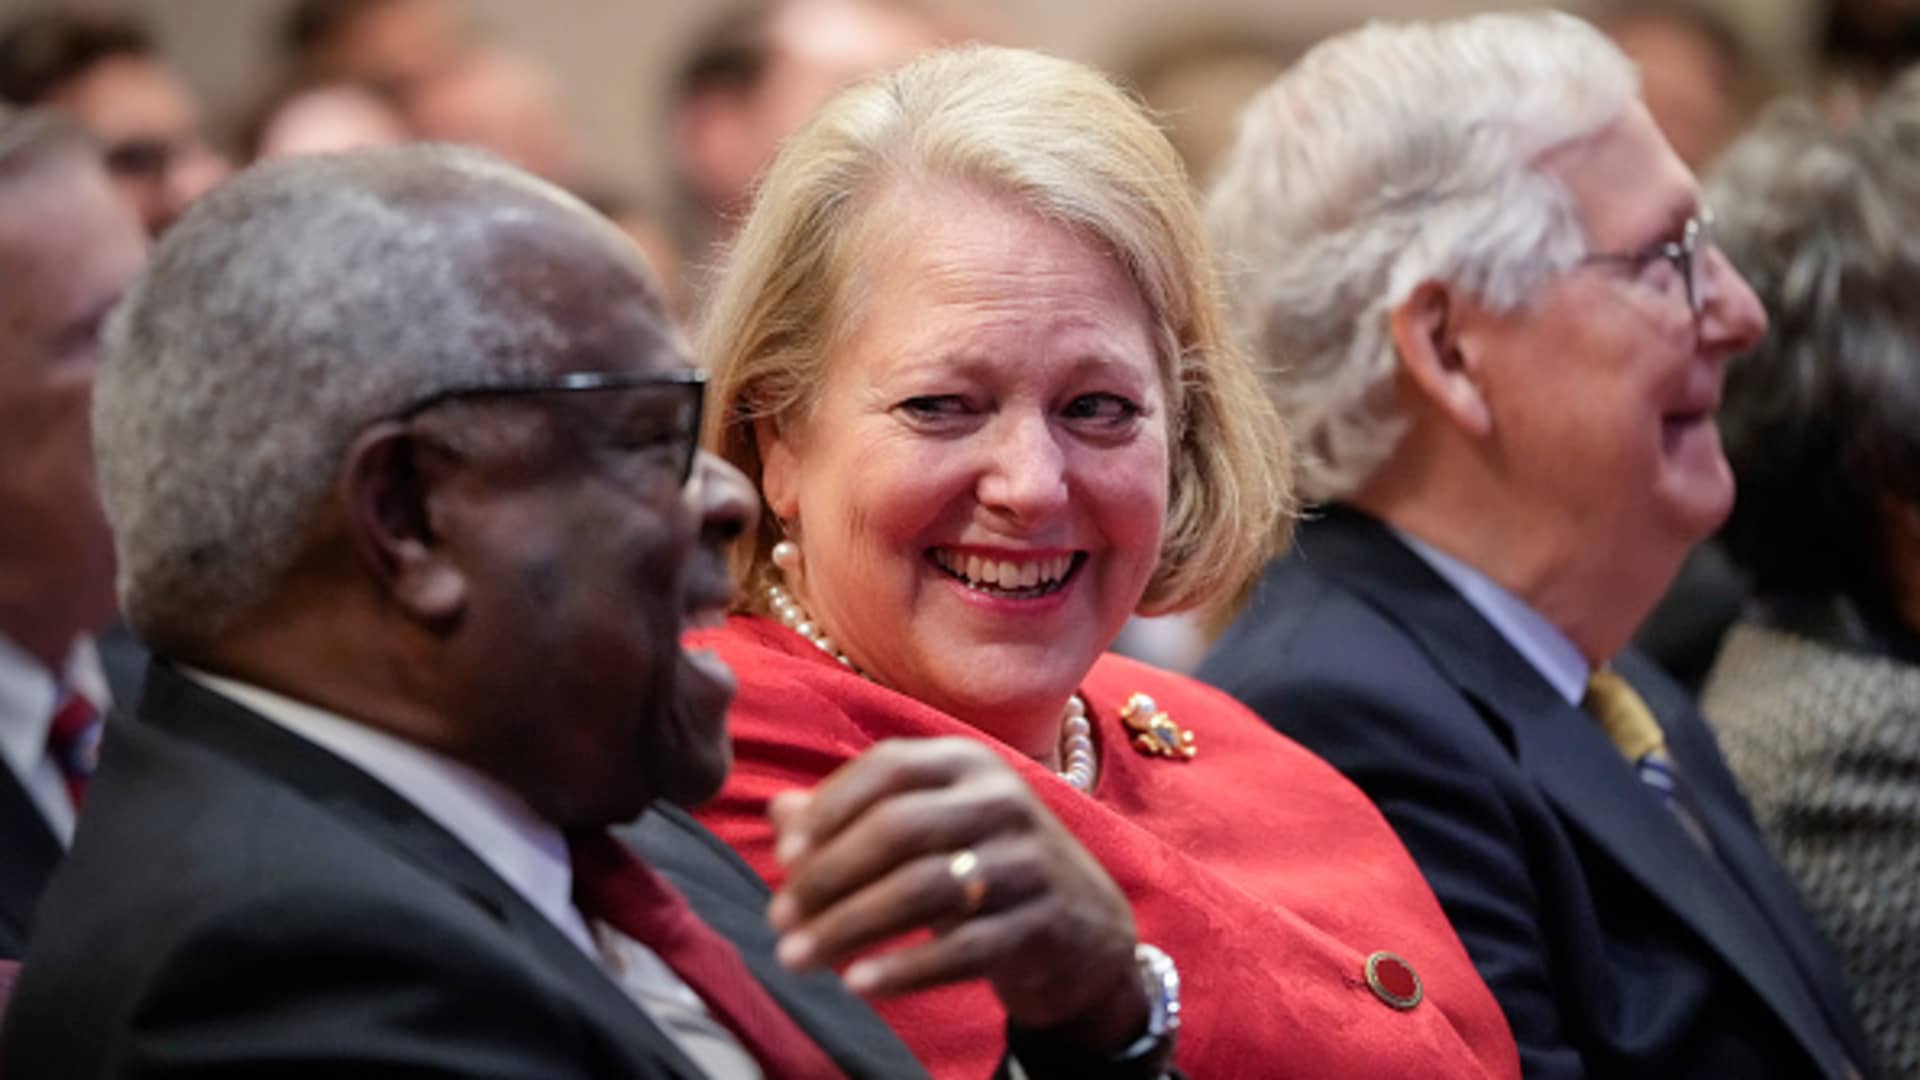 WASHINGTON, DC - OCTOBER 21: (L-R) Associate Supreme Court Justice Clarence Thomas sits with his wife and conservative activist Virginia Thomas while he waits to speak at the Heritage Foundation on October 21, 2021 in Washington, DC.